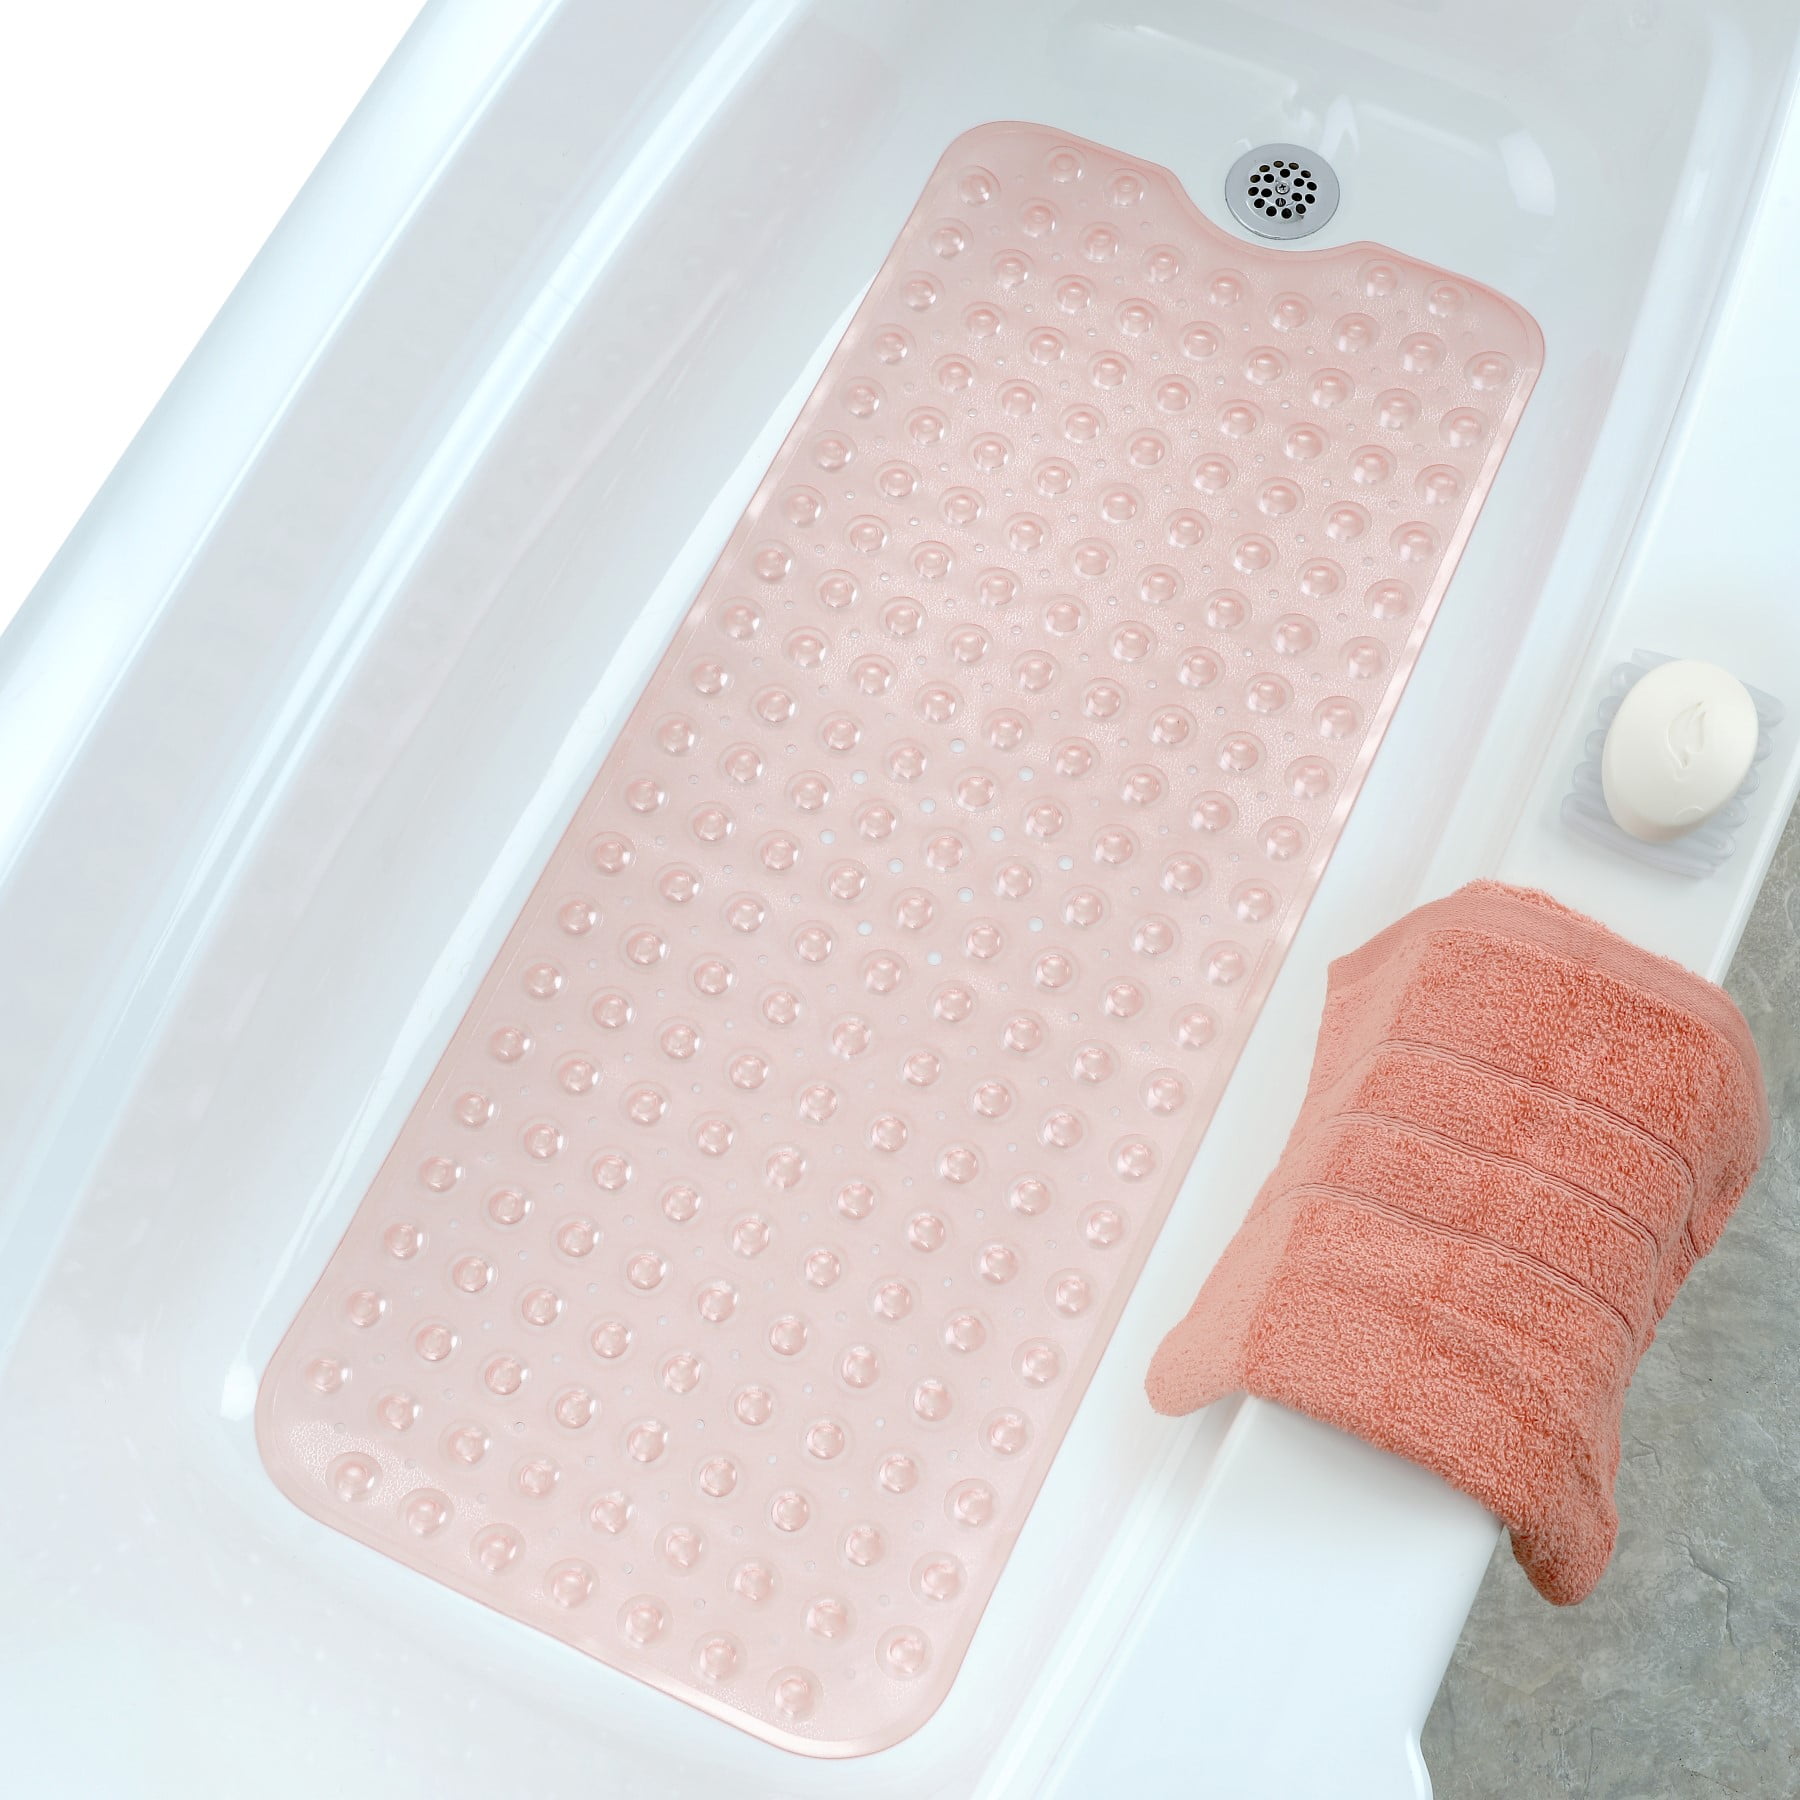 39" Green Bathtub Mat with Suction Cups SlipX Solutions Extra Long Bath Mat 